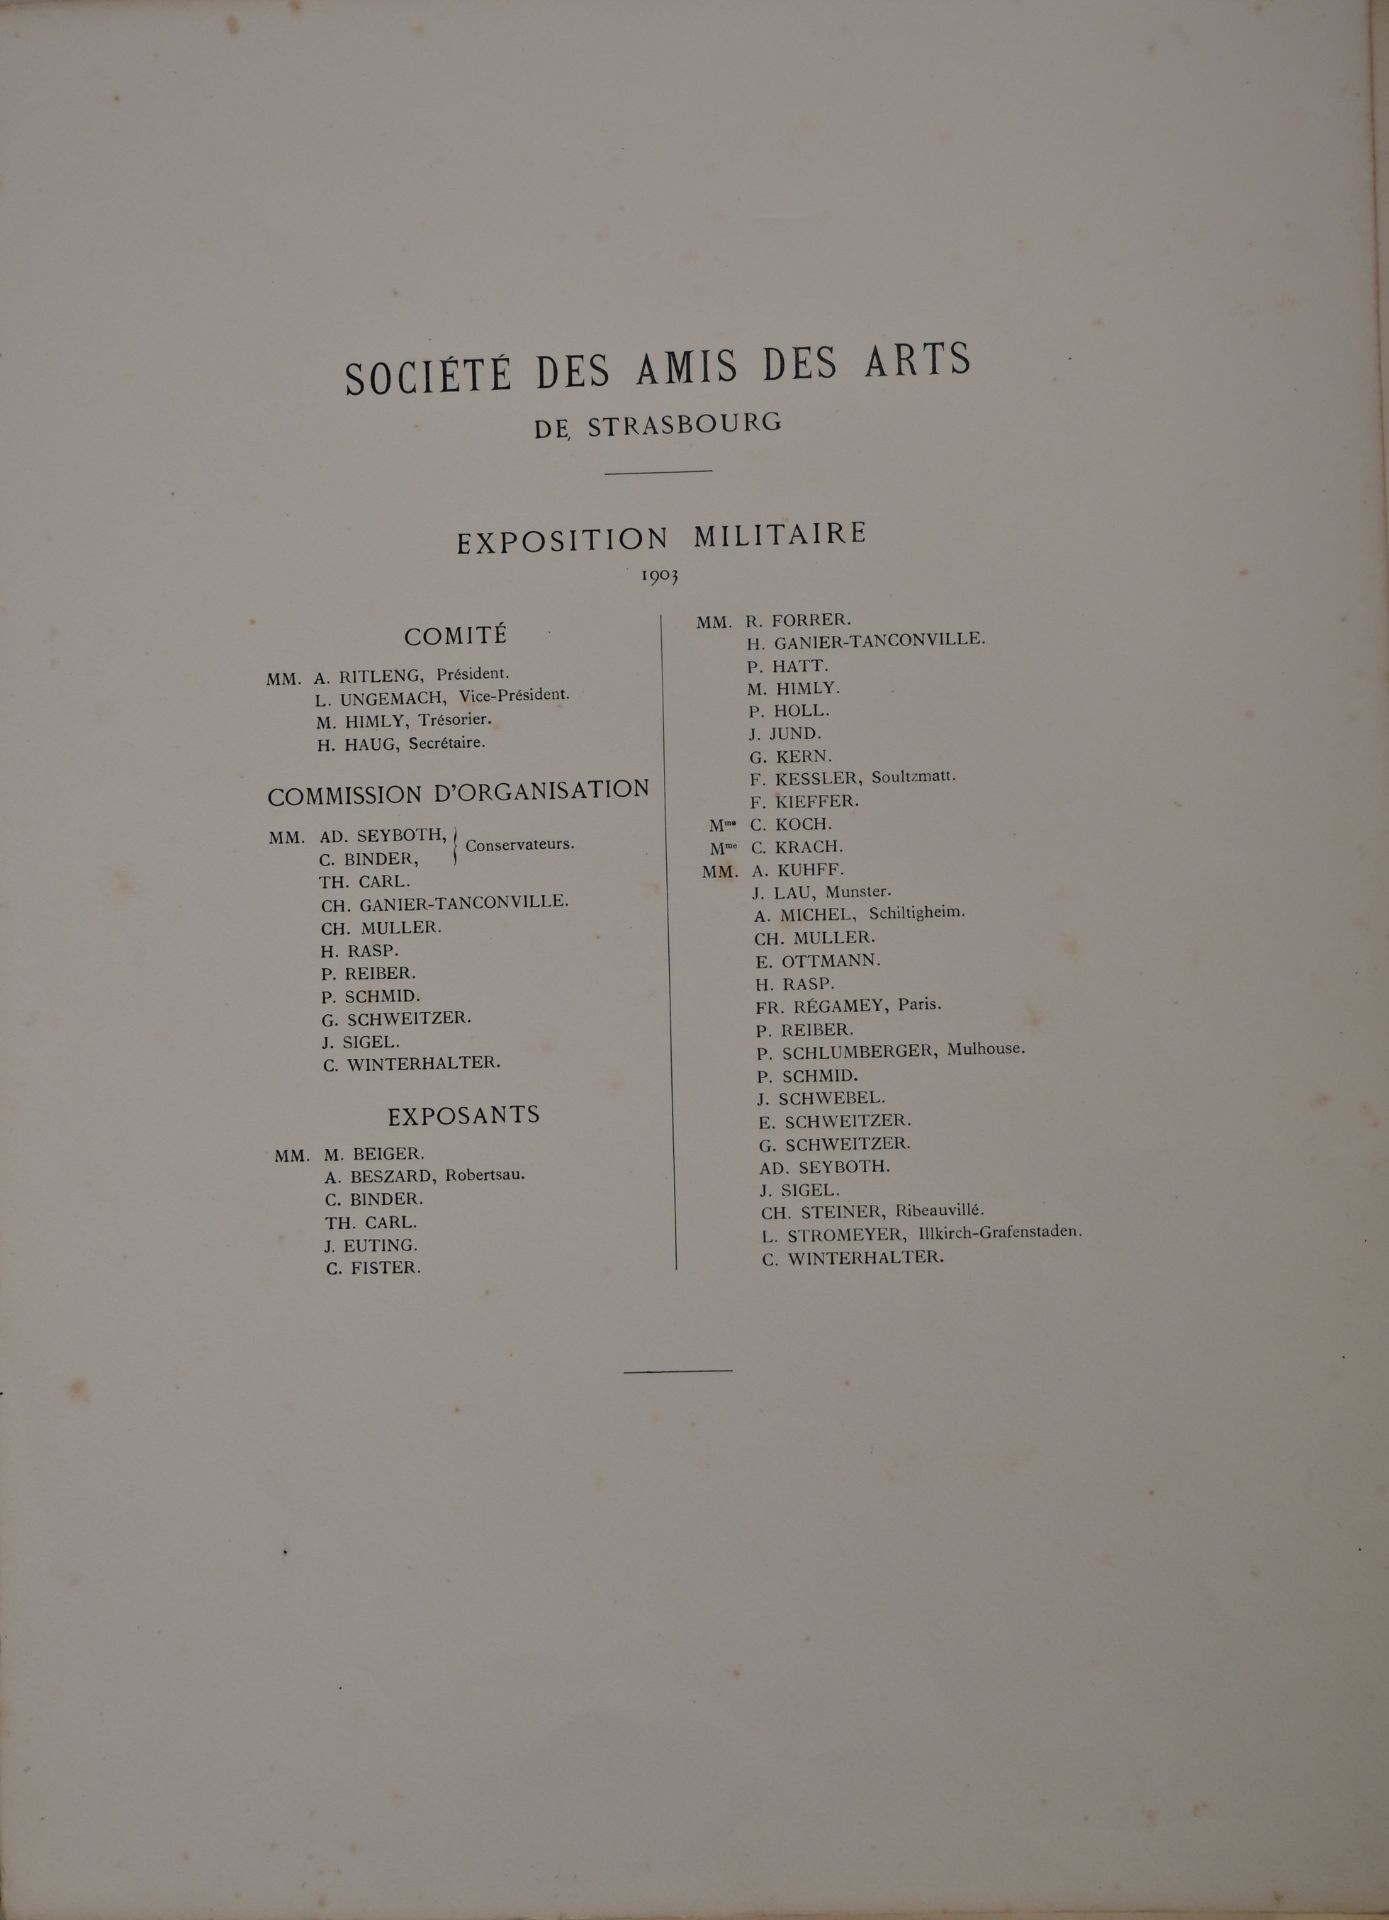 Album of the Military Exhibition of the Society of Friends of the Arts of Strasbourg. 1904. - Bild 3 aus 19